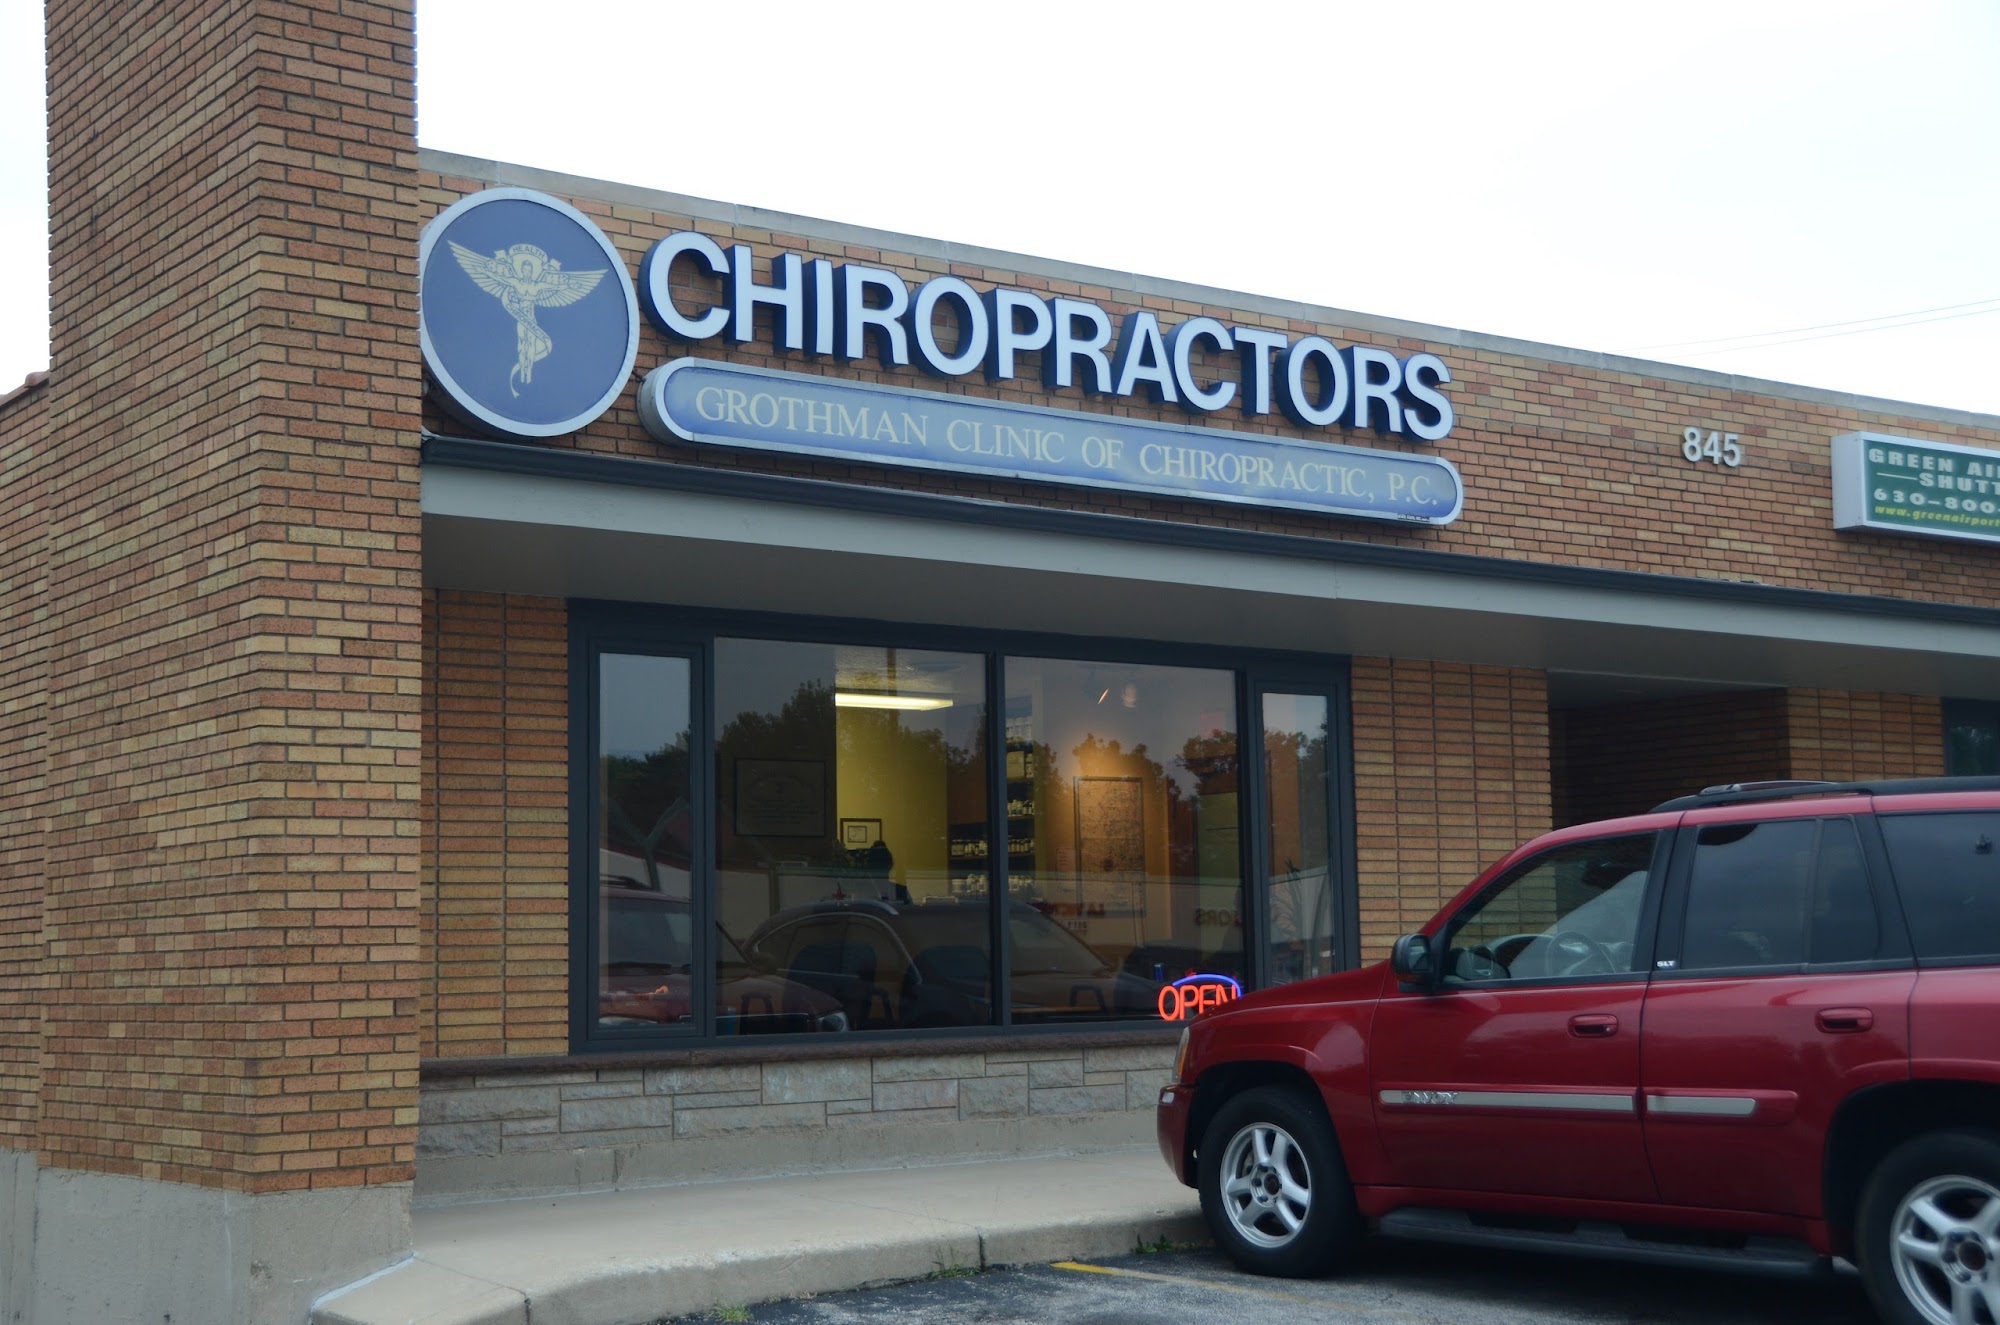 Grothman Clinic of Chiropractic